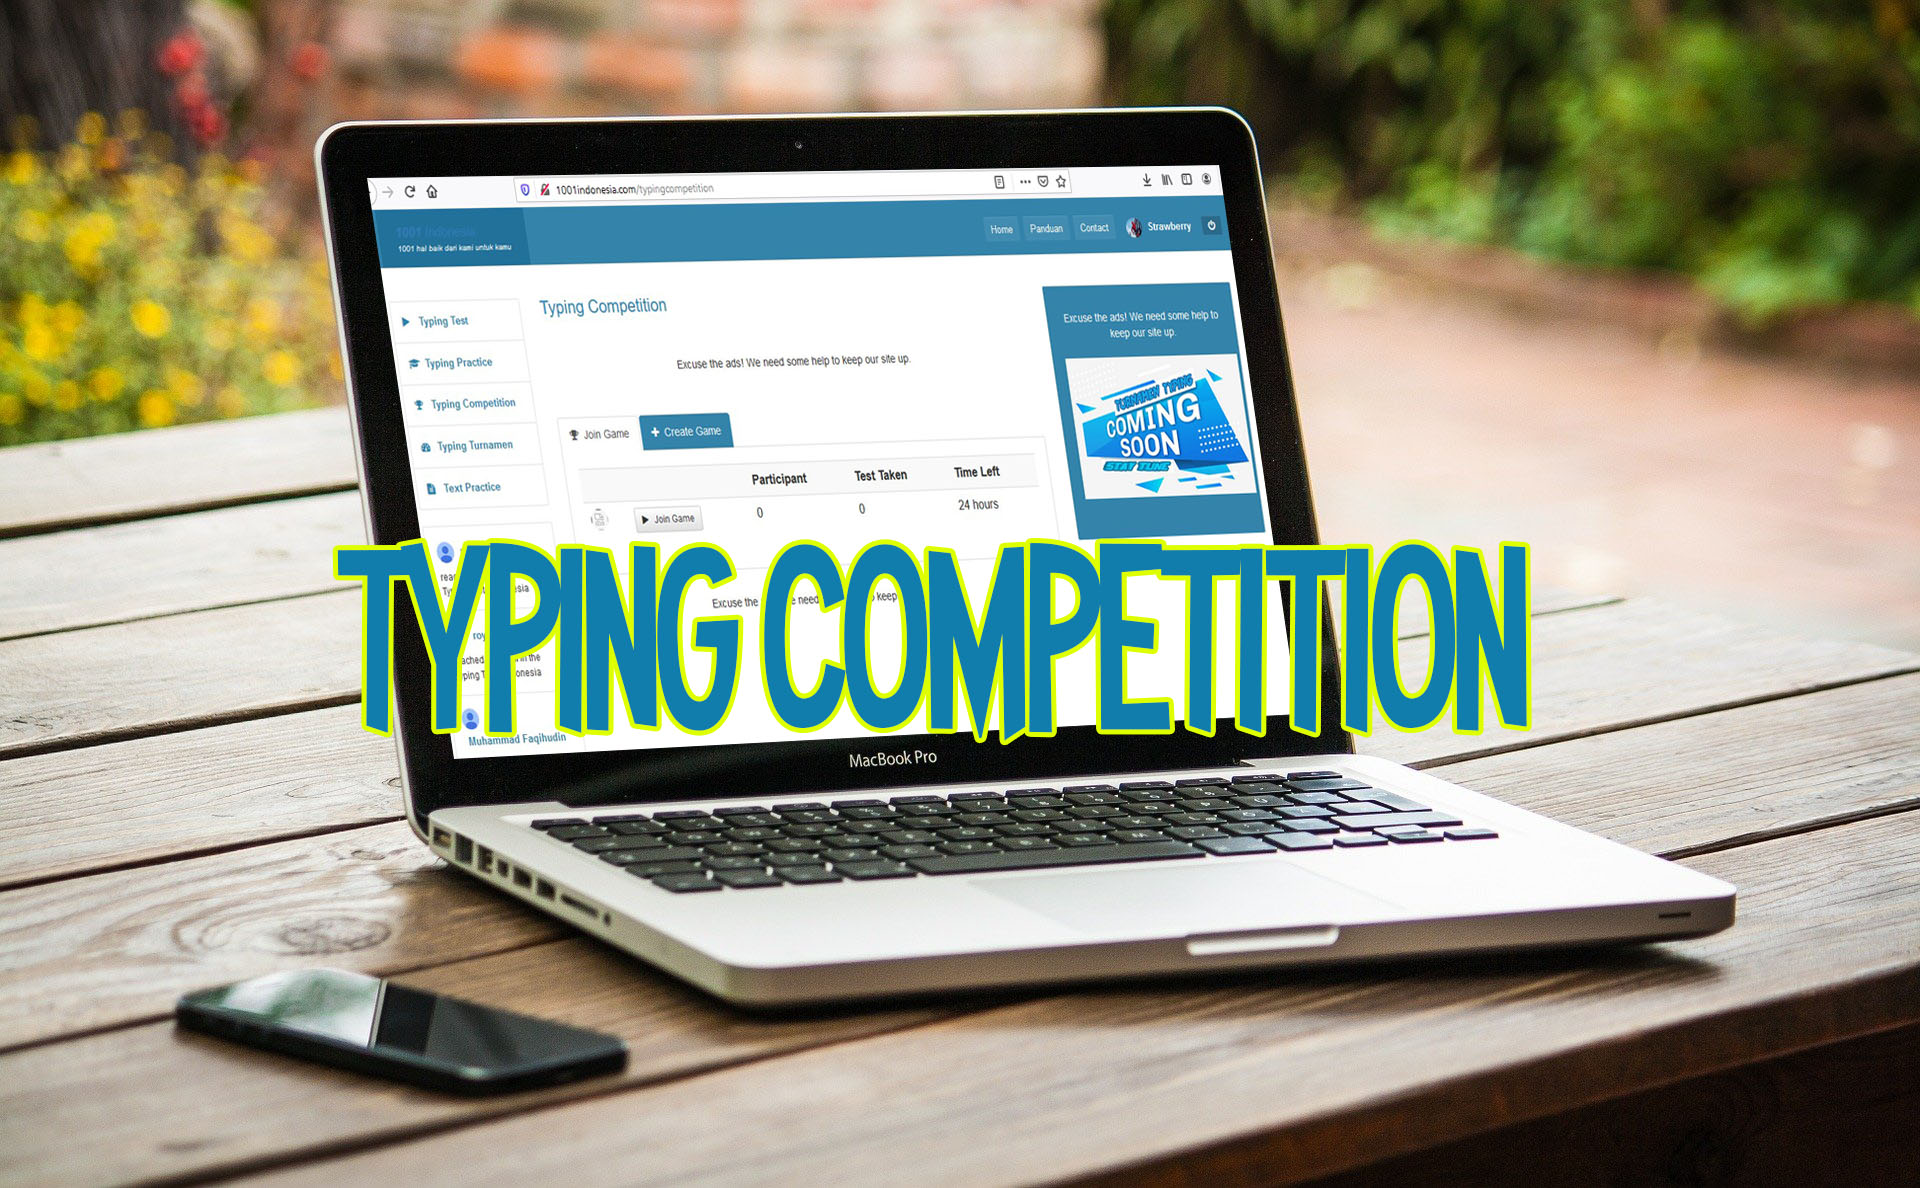 Typing Competition